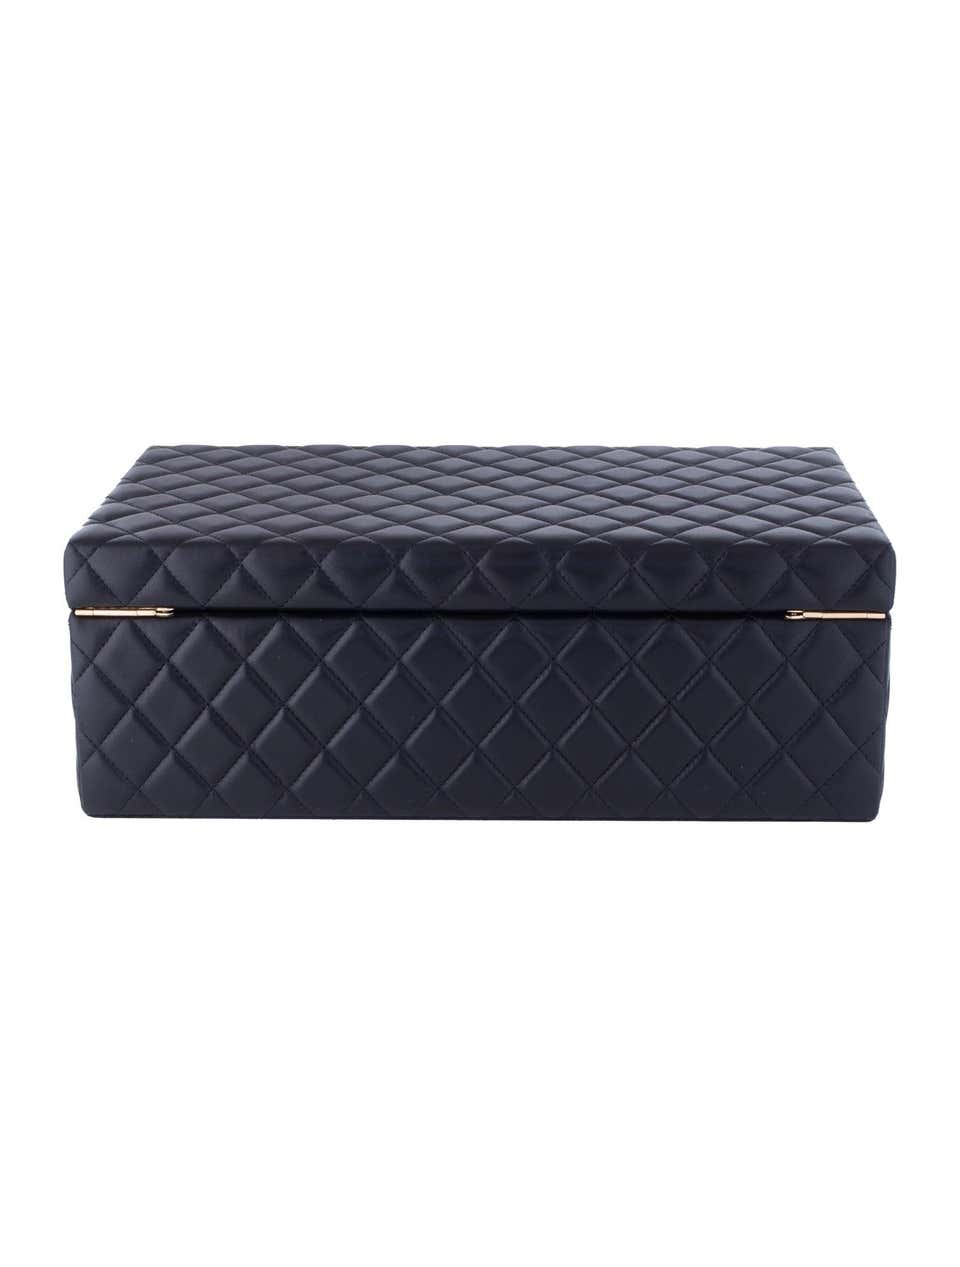 Chanel Limited Edition Black Vanity Case Rare Home Decor Jewelry Box –  House of Carver